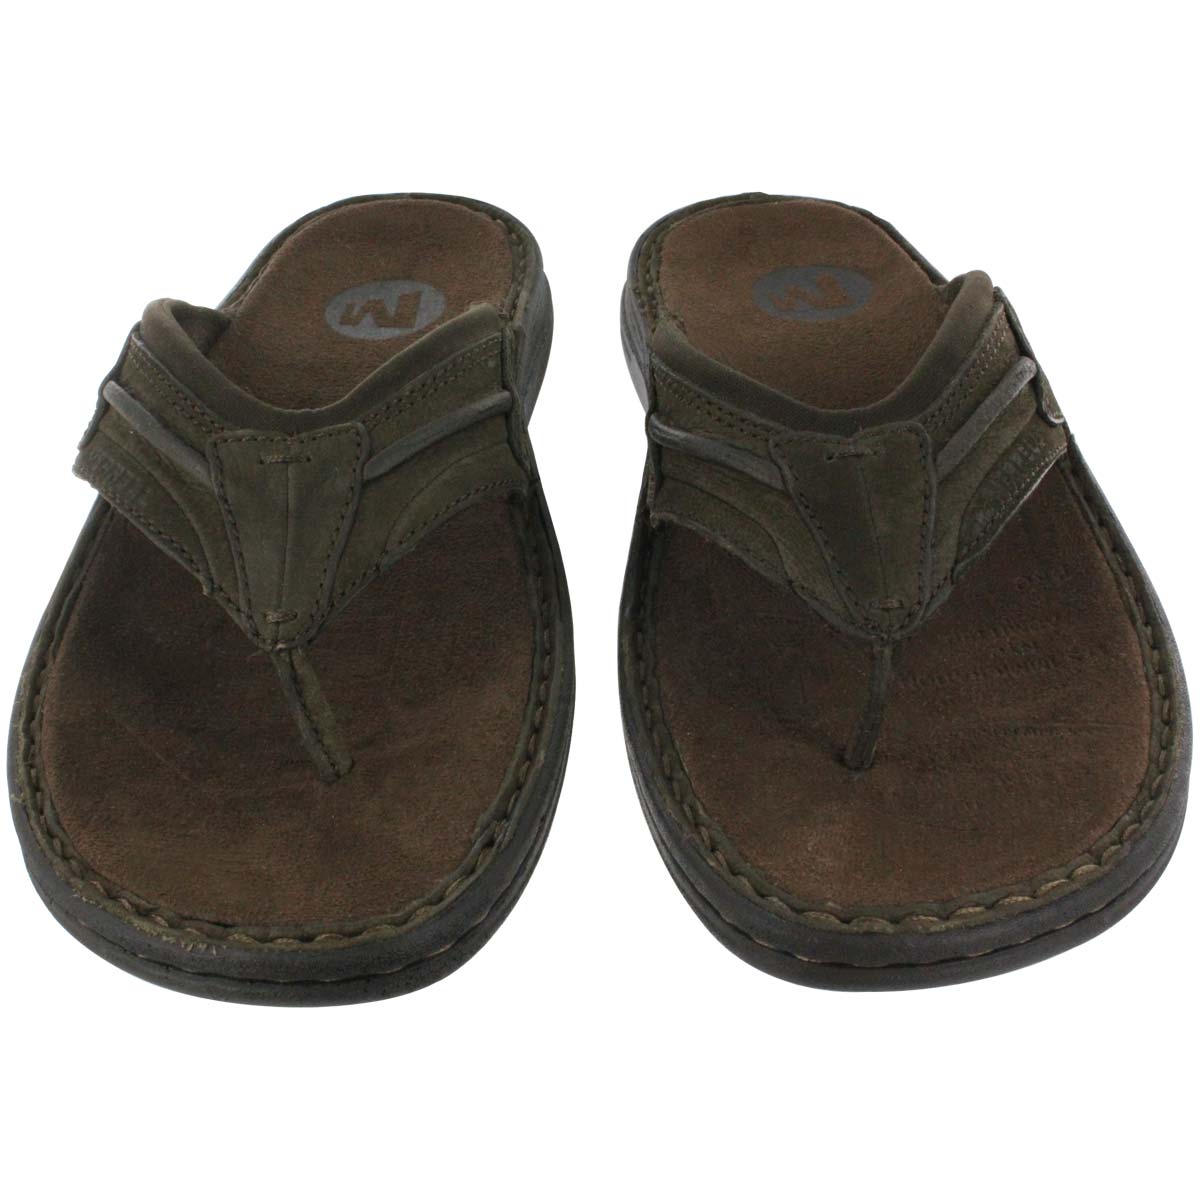 ... NOMAD from MERRELL has a refined comfort perfect for traveling the